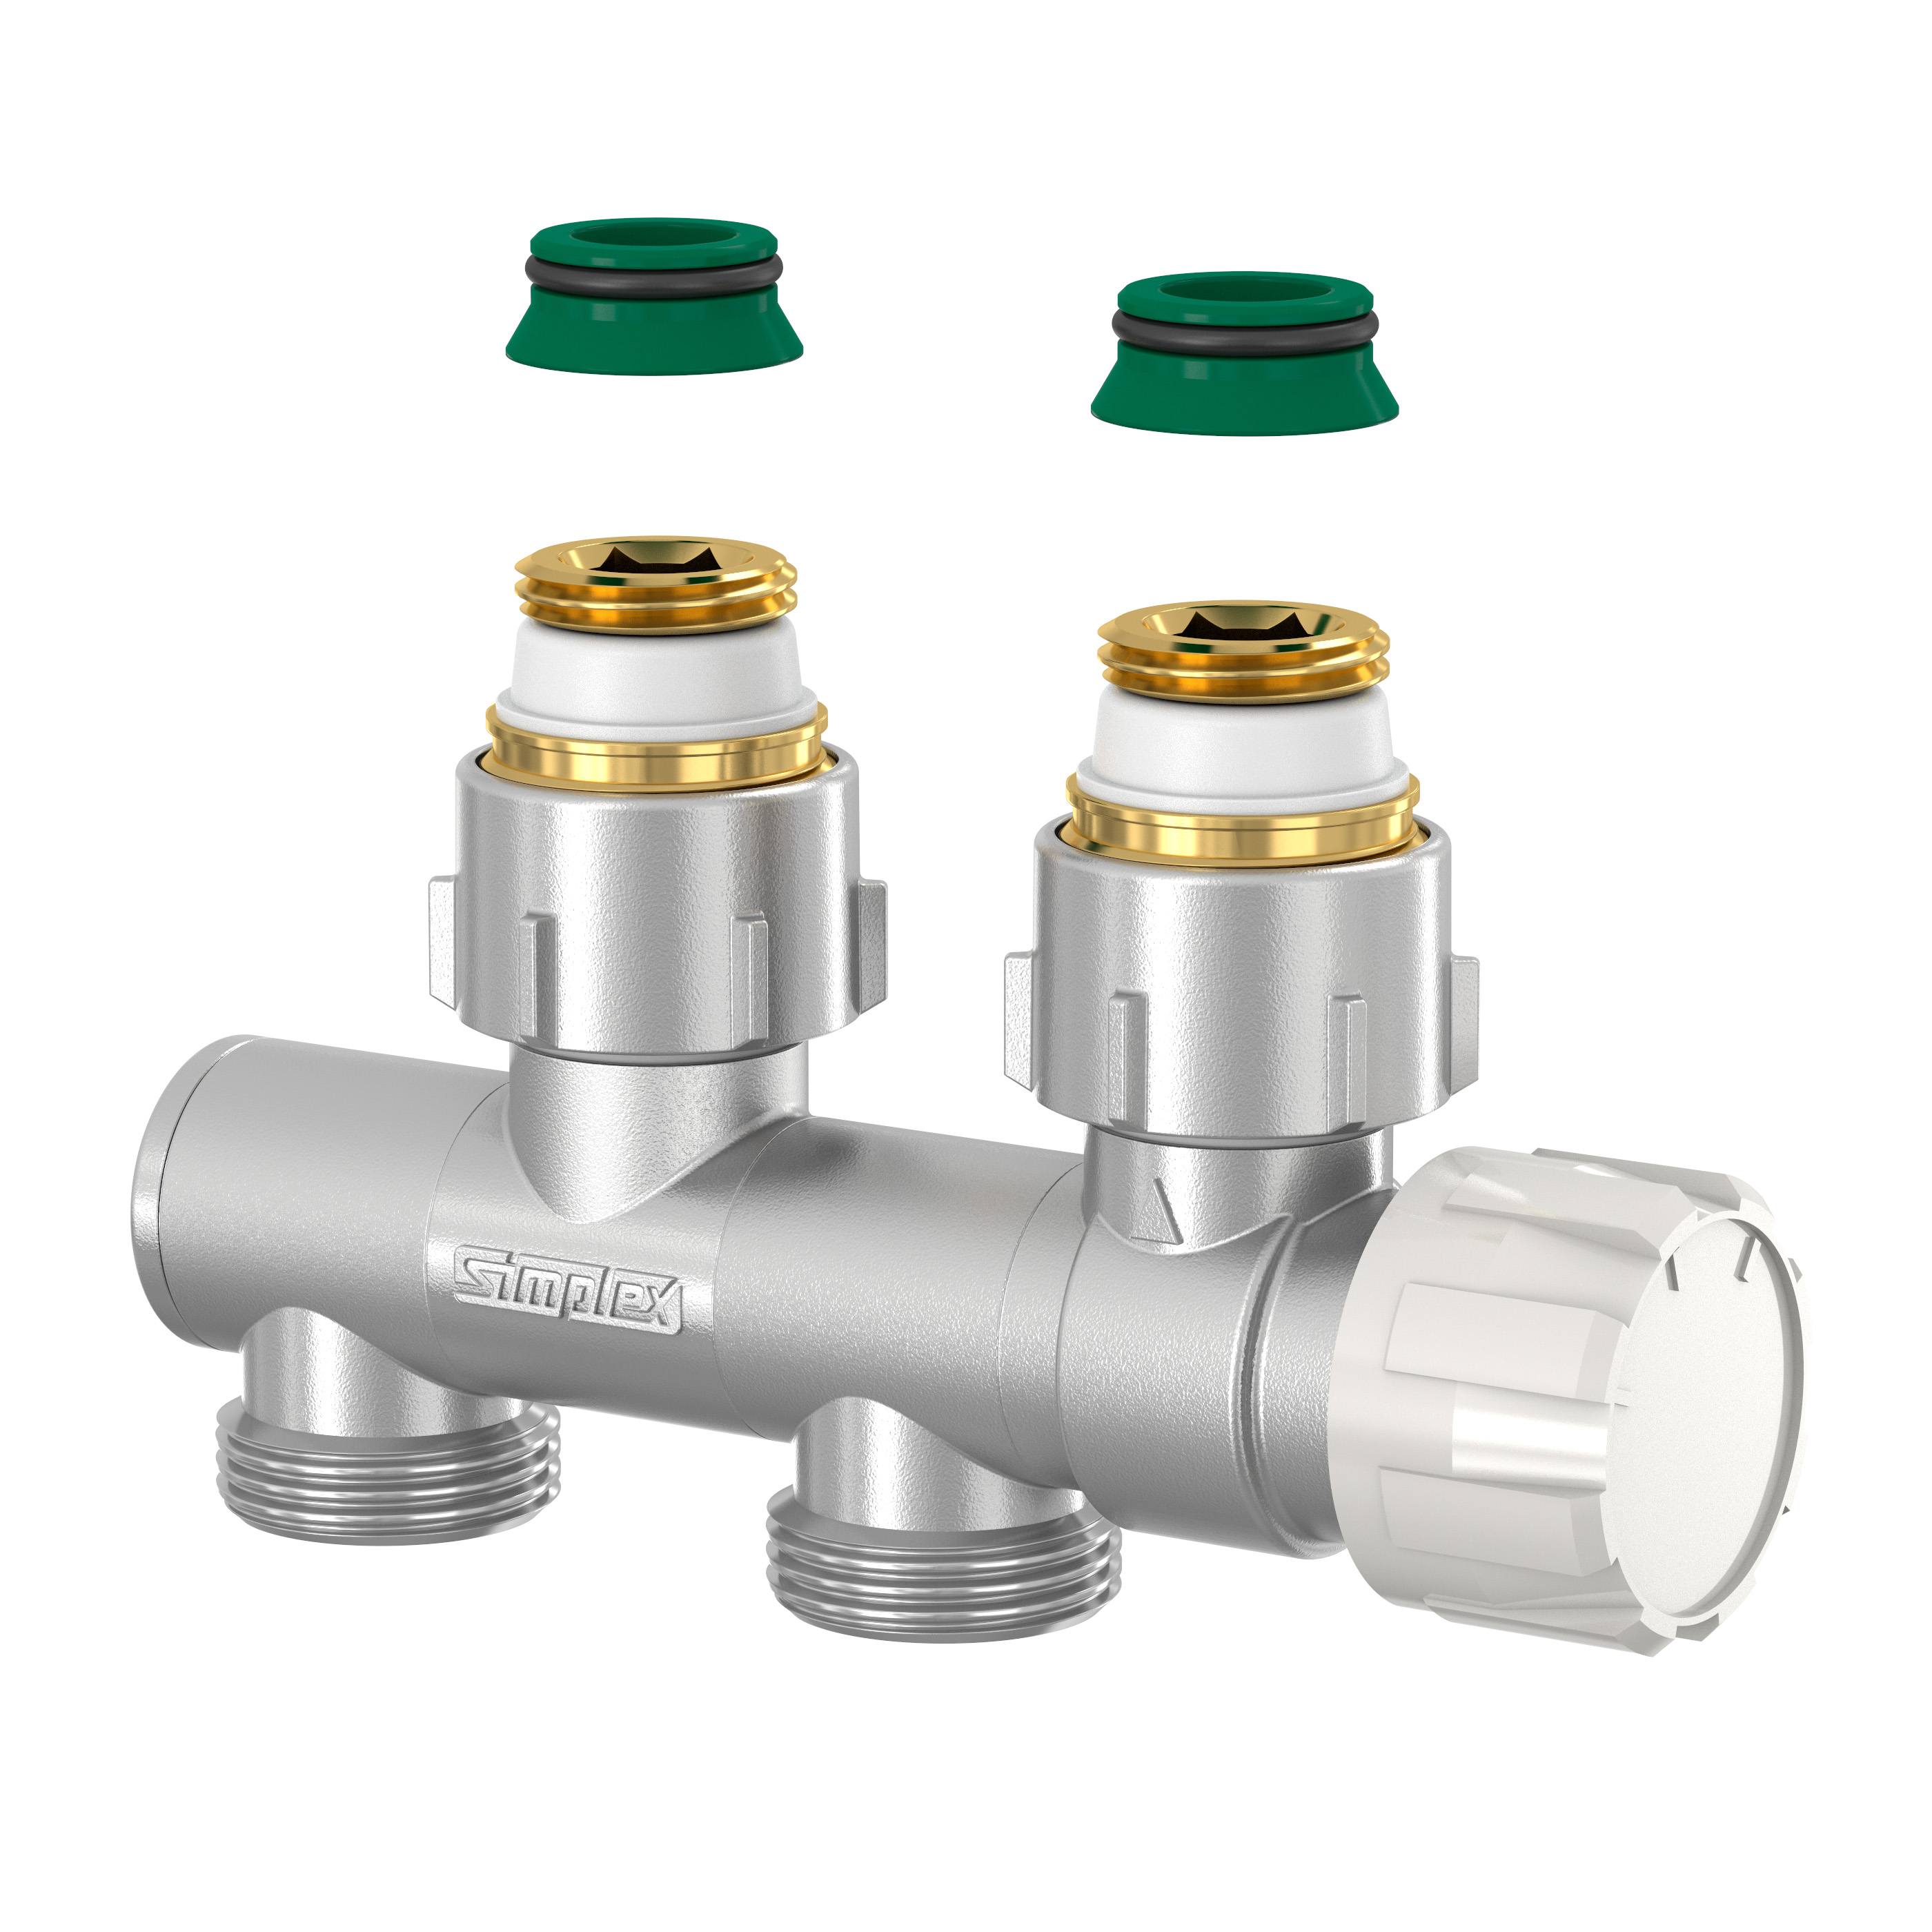 Central point thermostatic valves